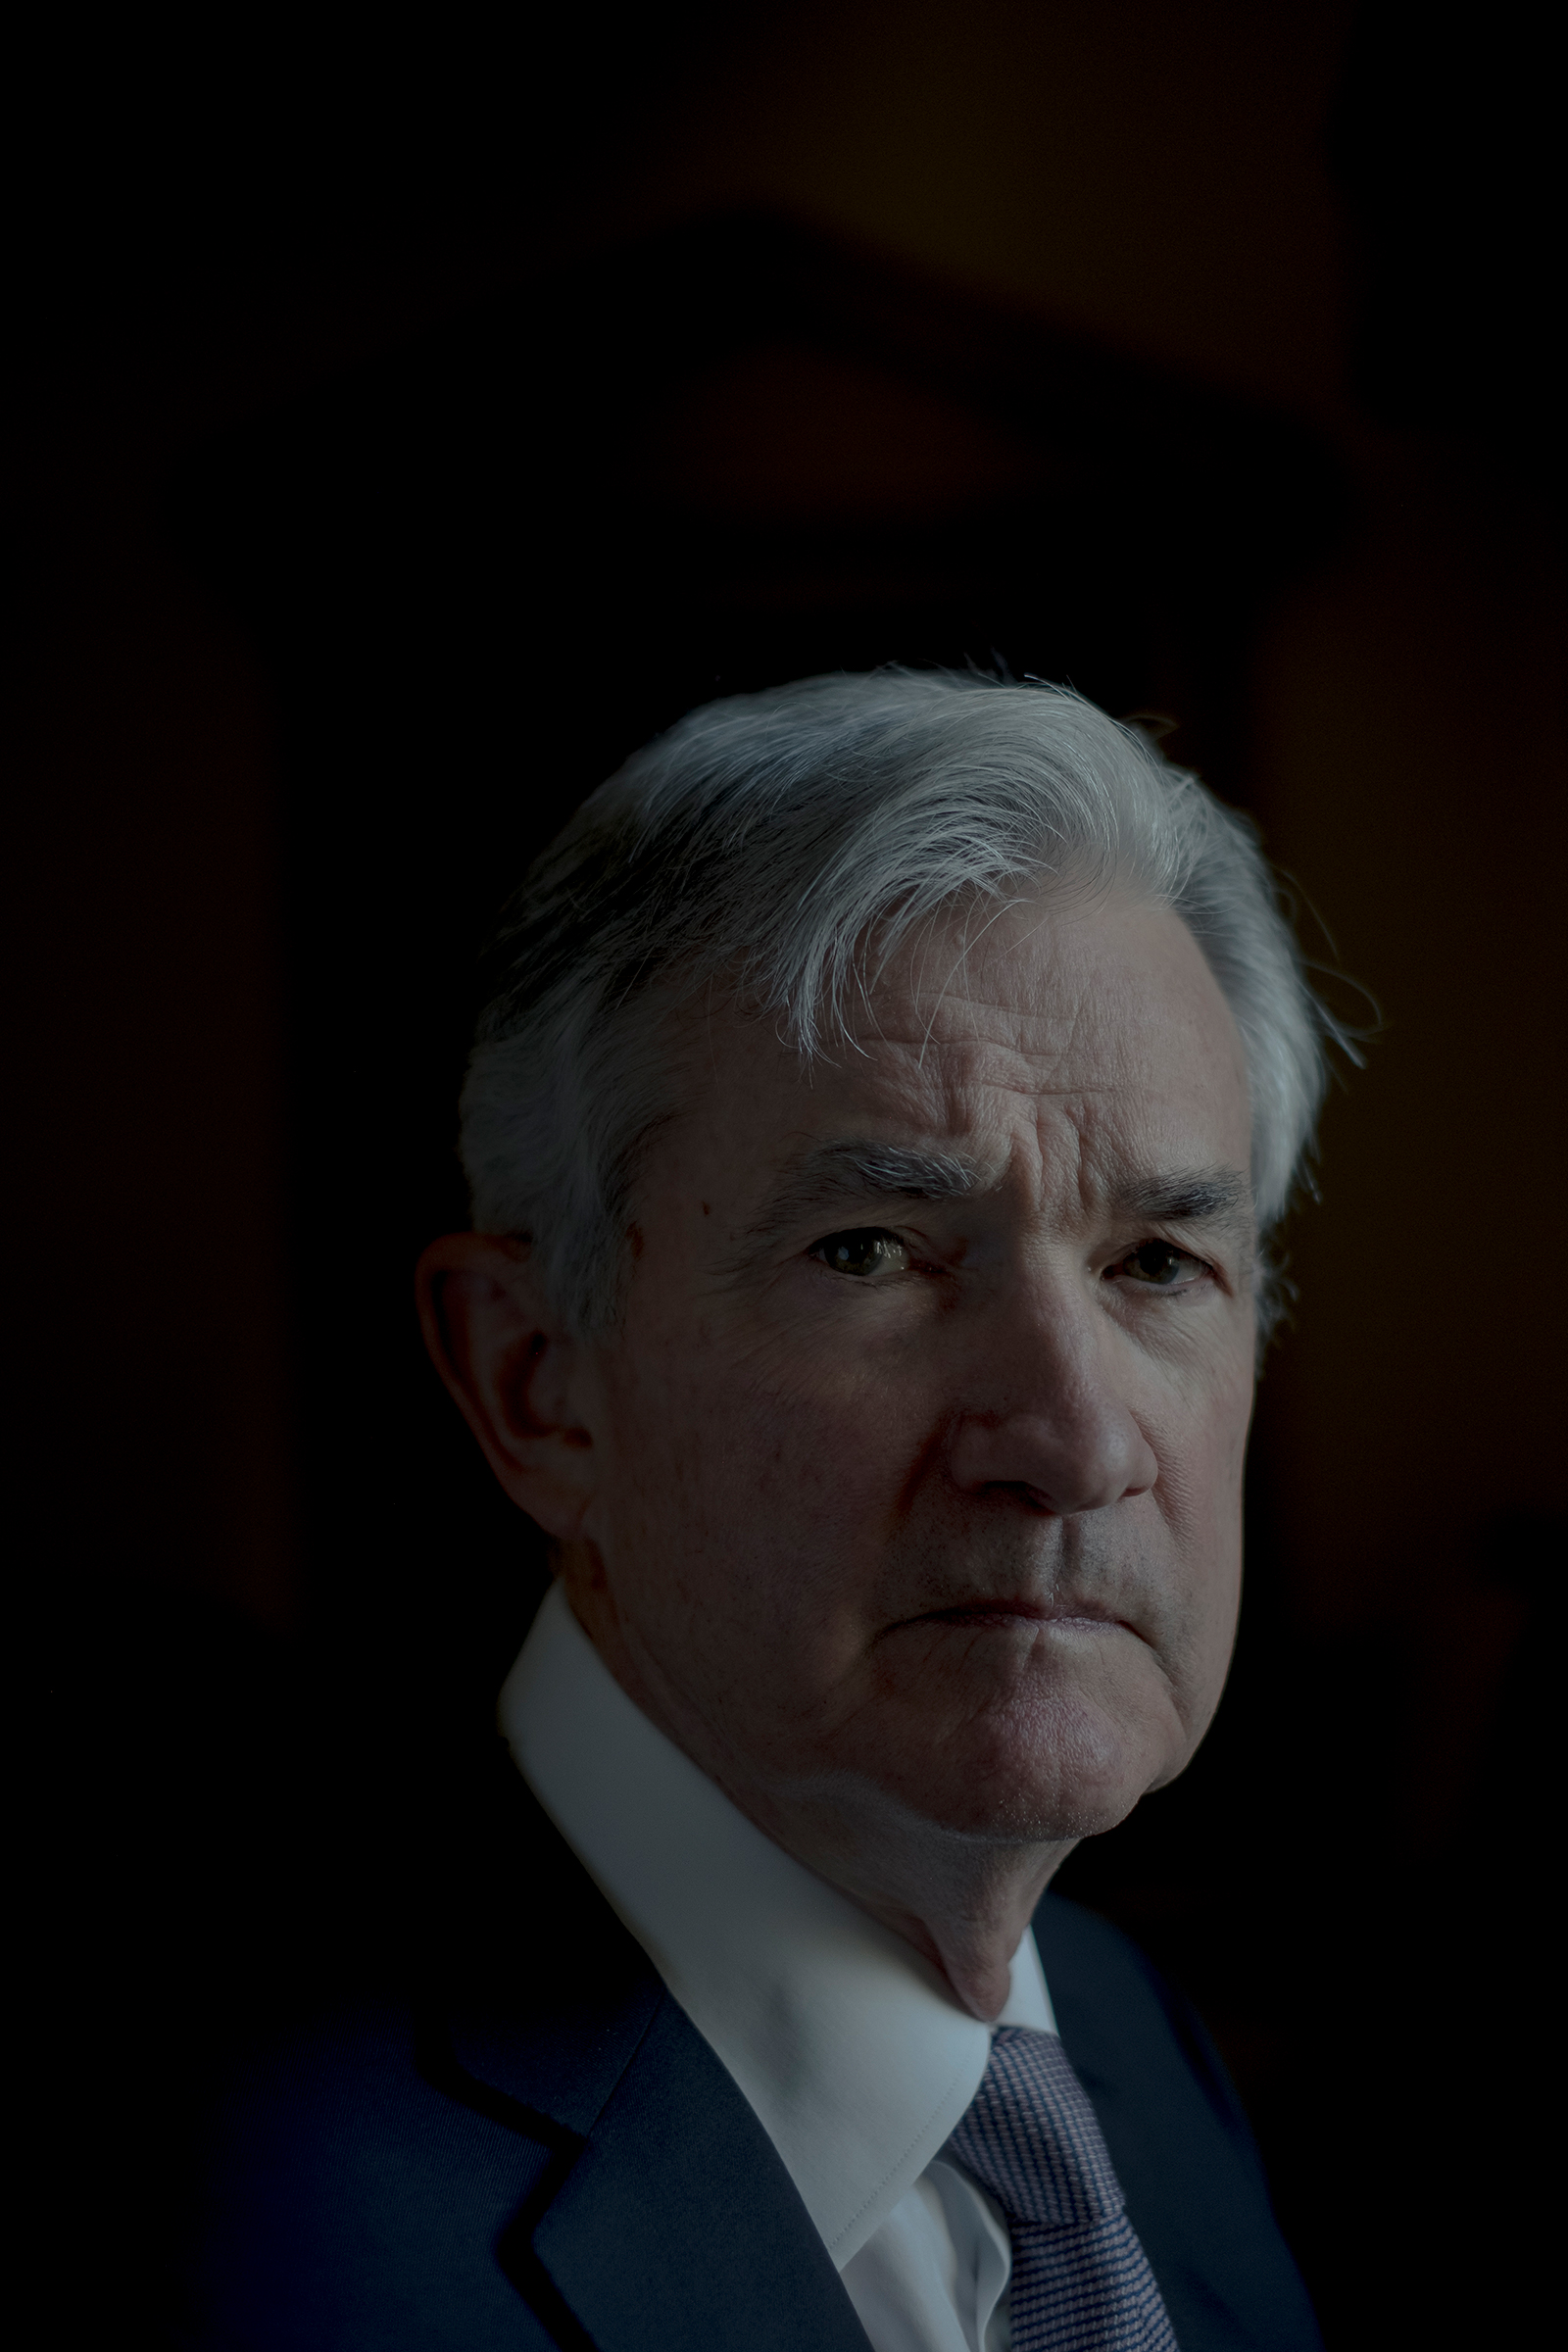 Powell in the boardroom at the Federal Reserve in Washington on May 13 (Gabriella Demczuk for TIME)